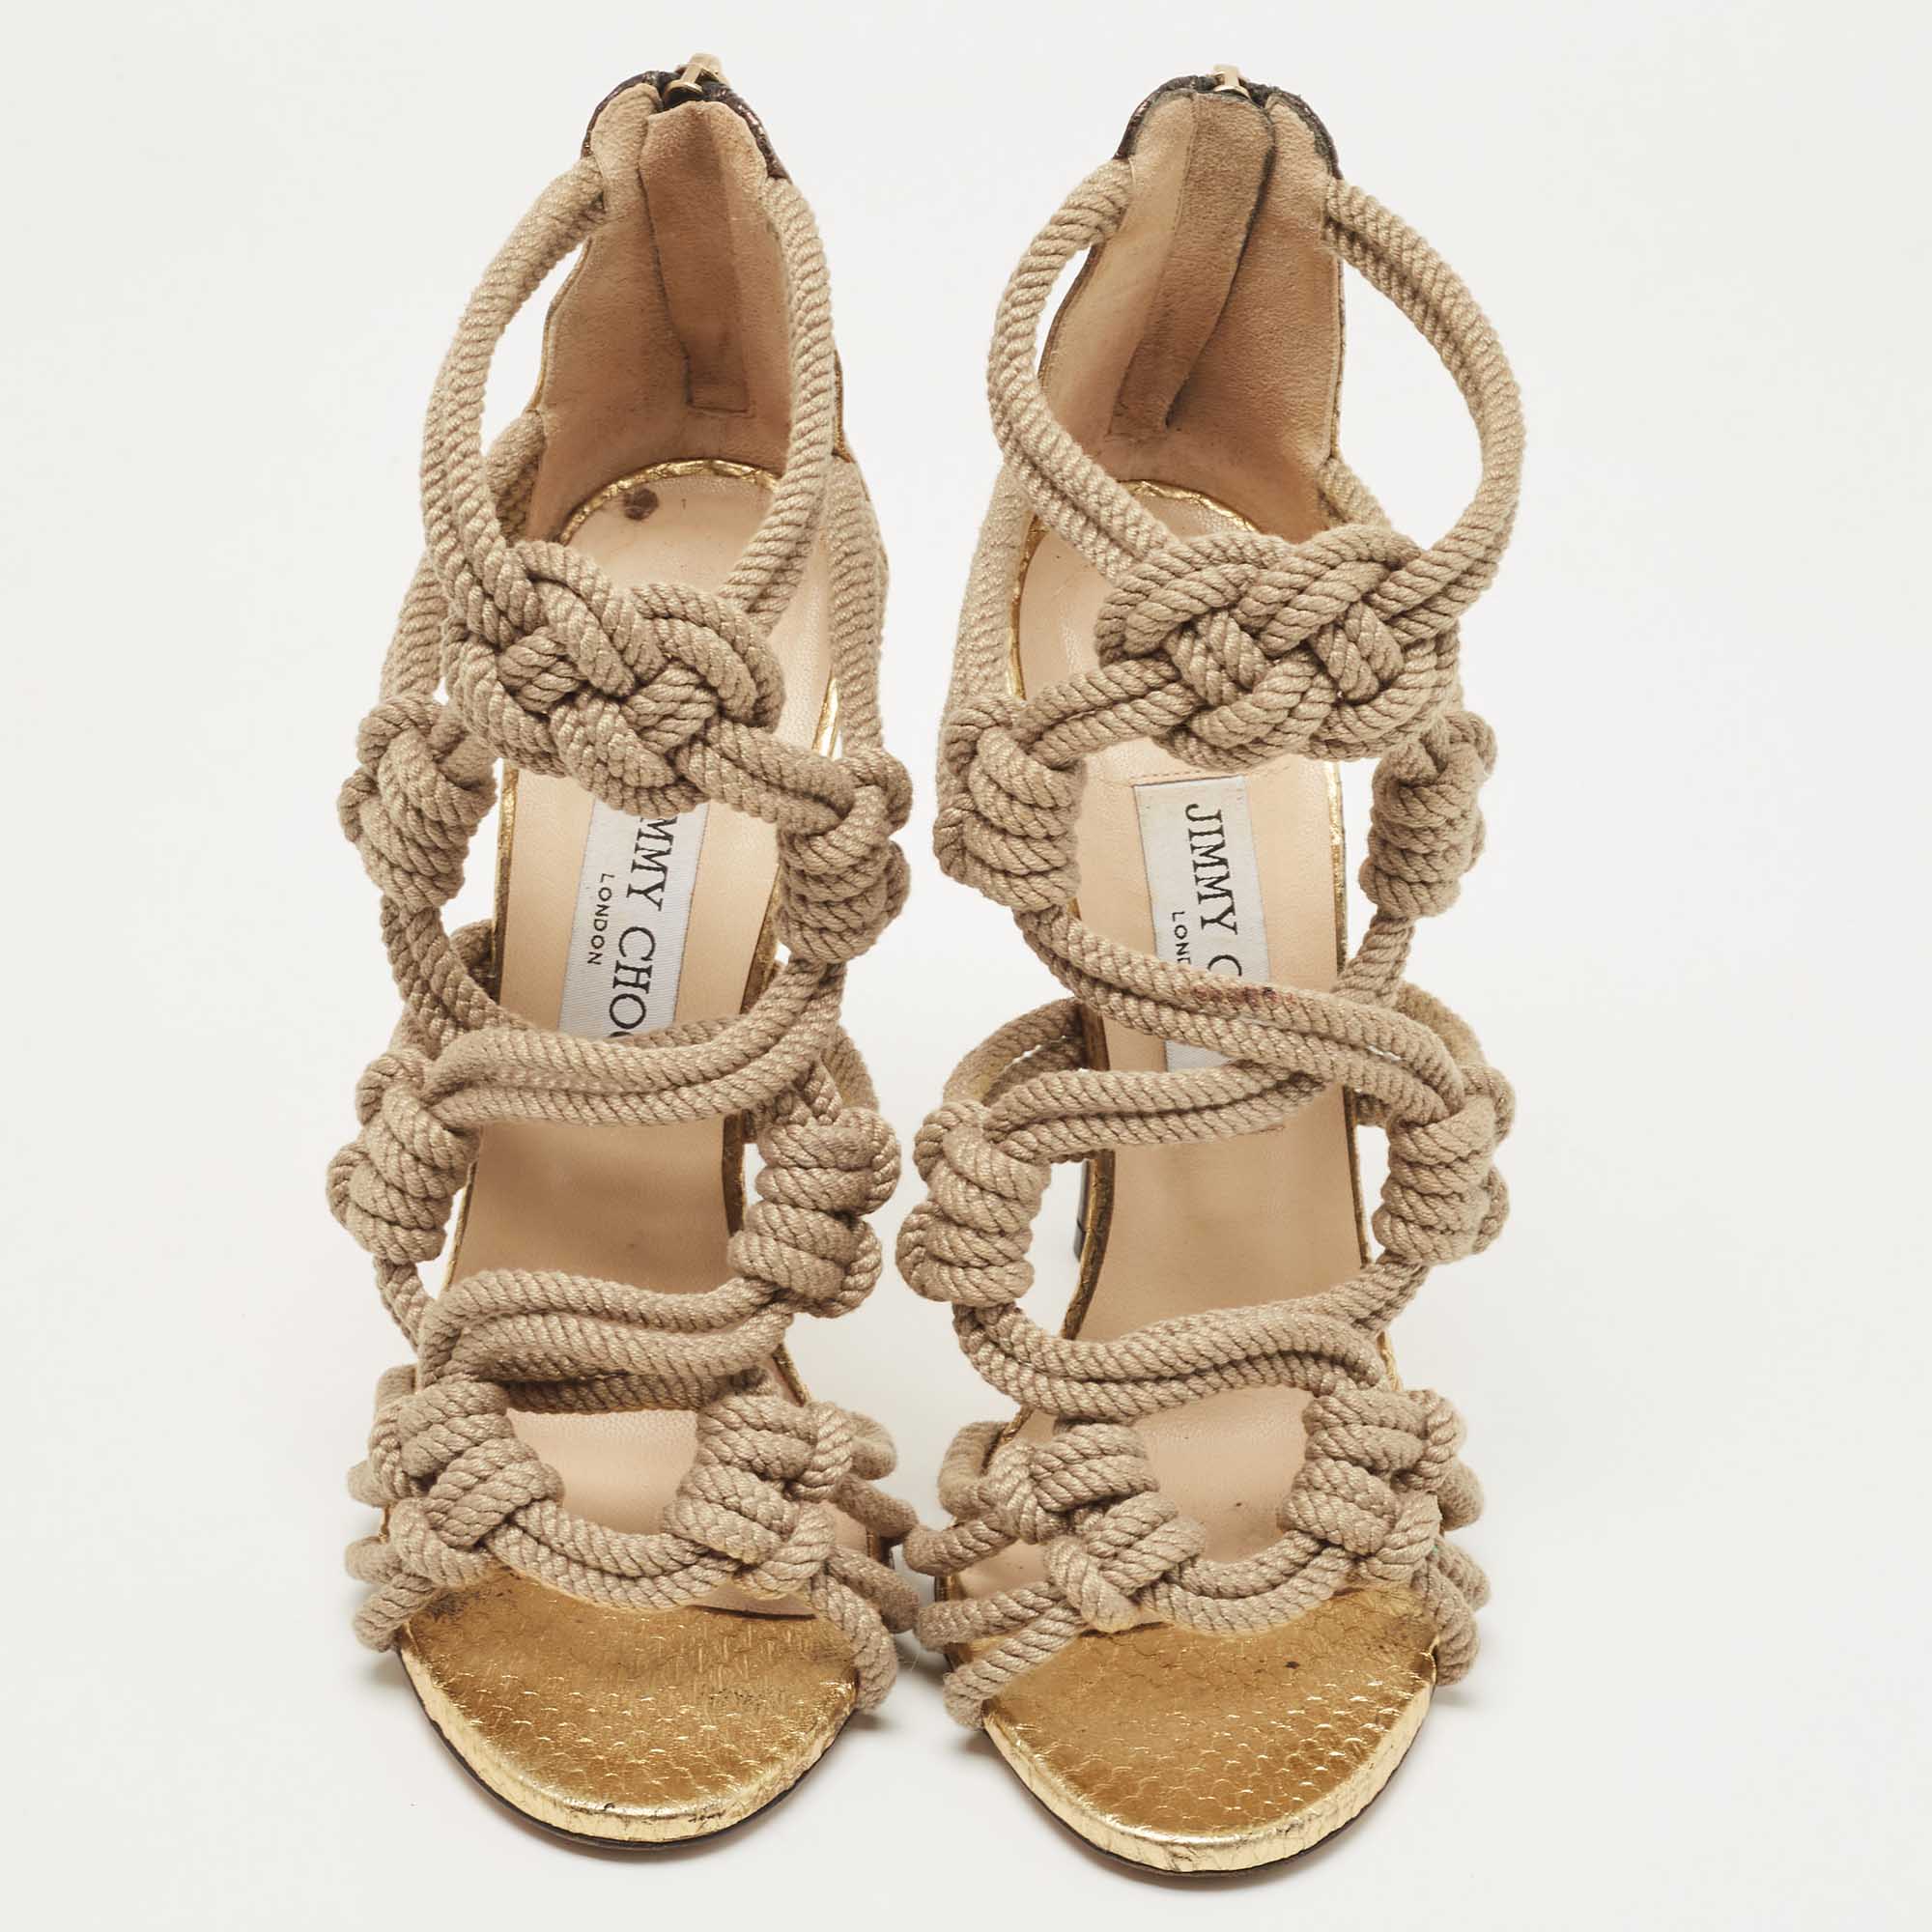 Jimmy Choo Beige/Gold Knotted Rope And Embossed Snakeskin Sandals Size 39